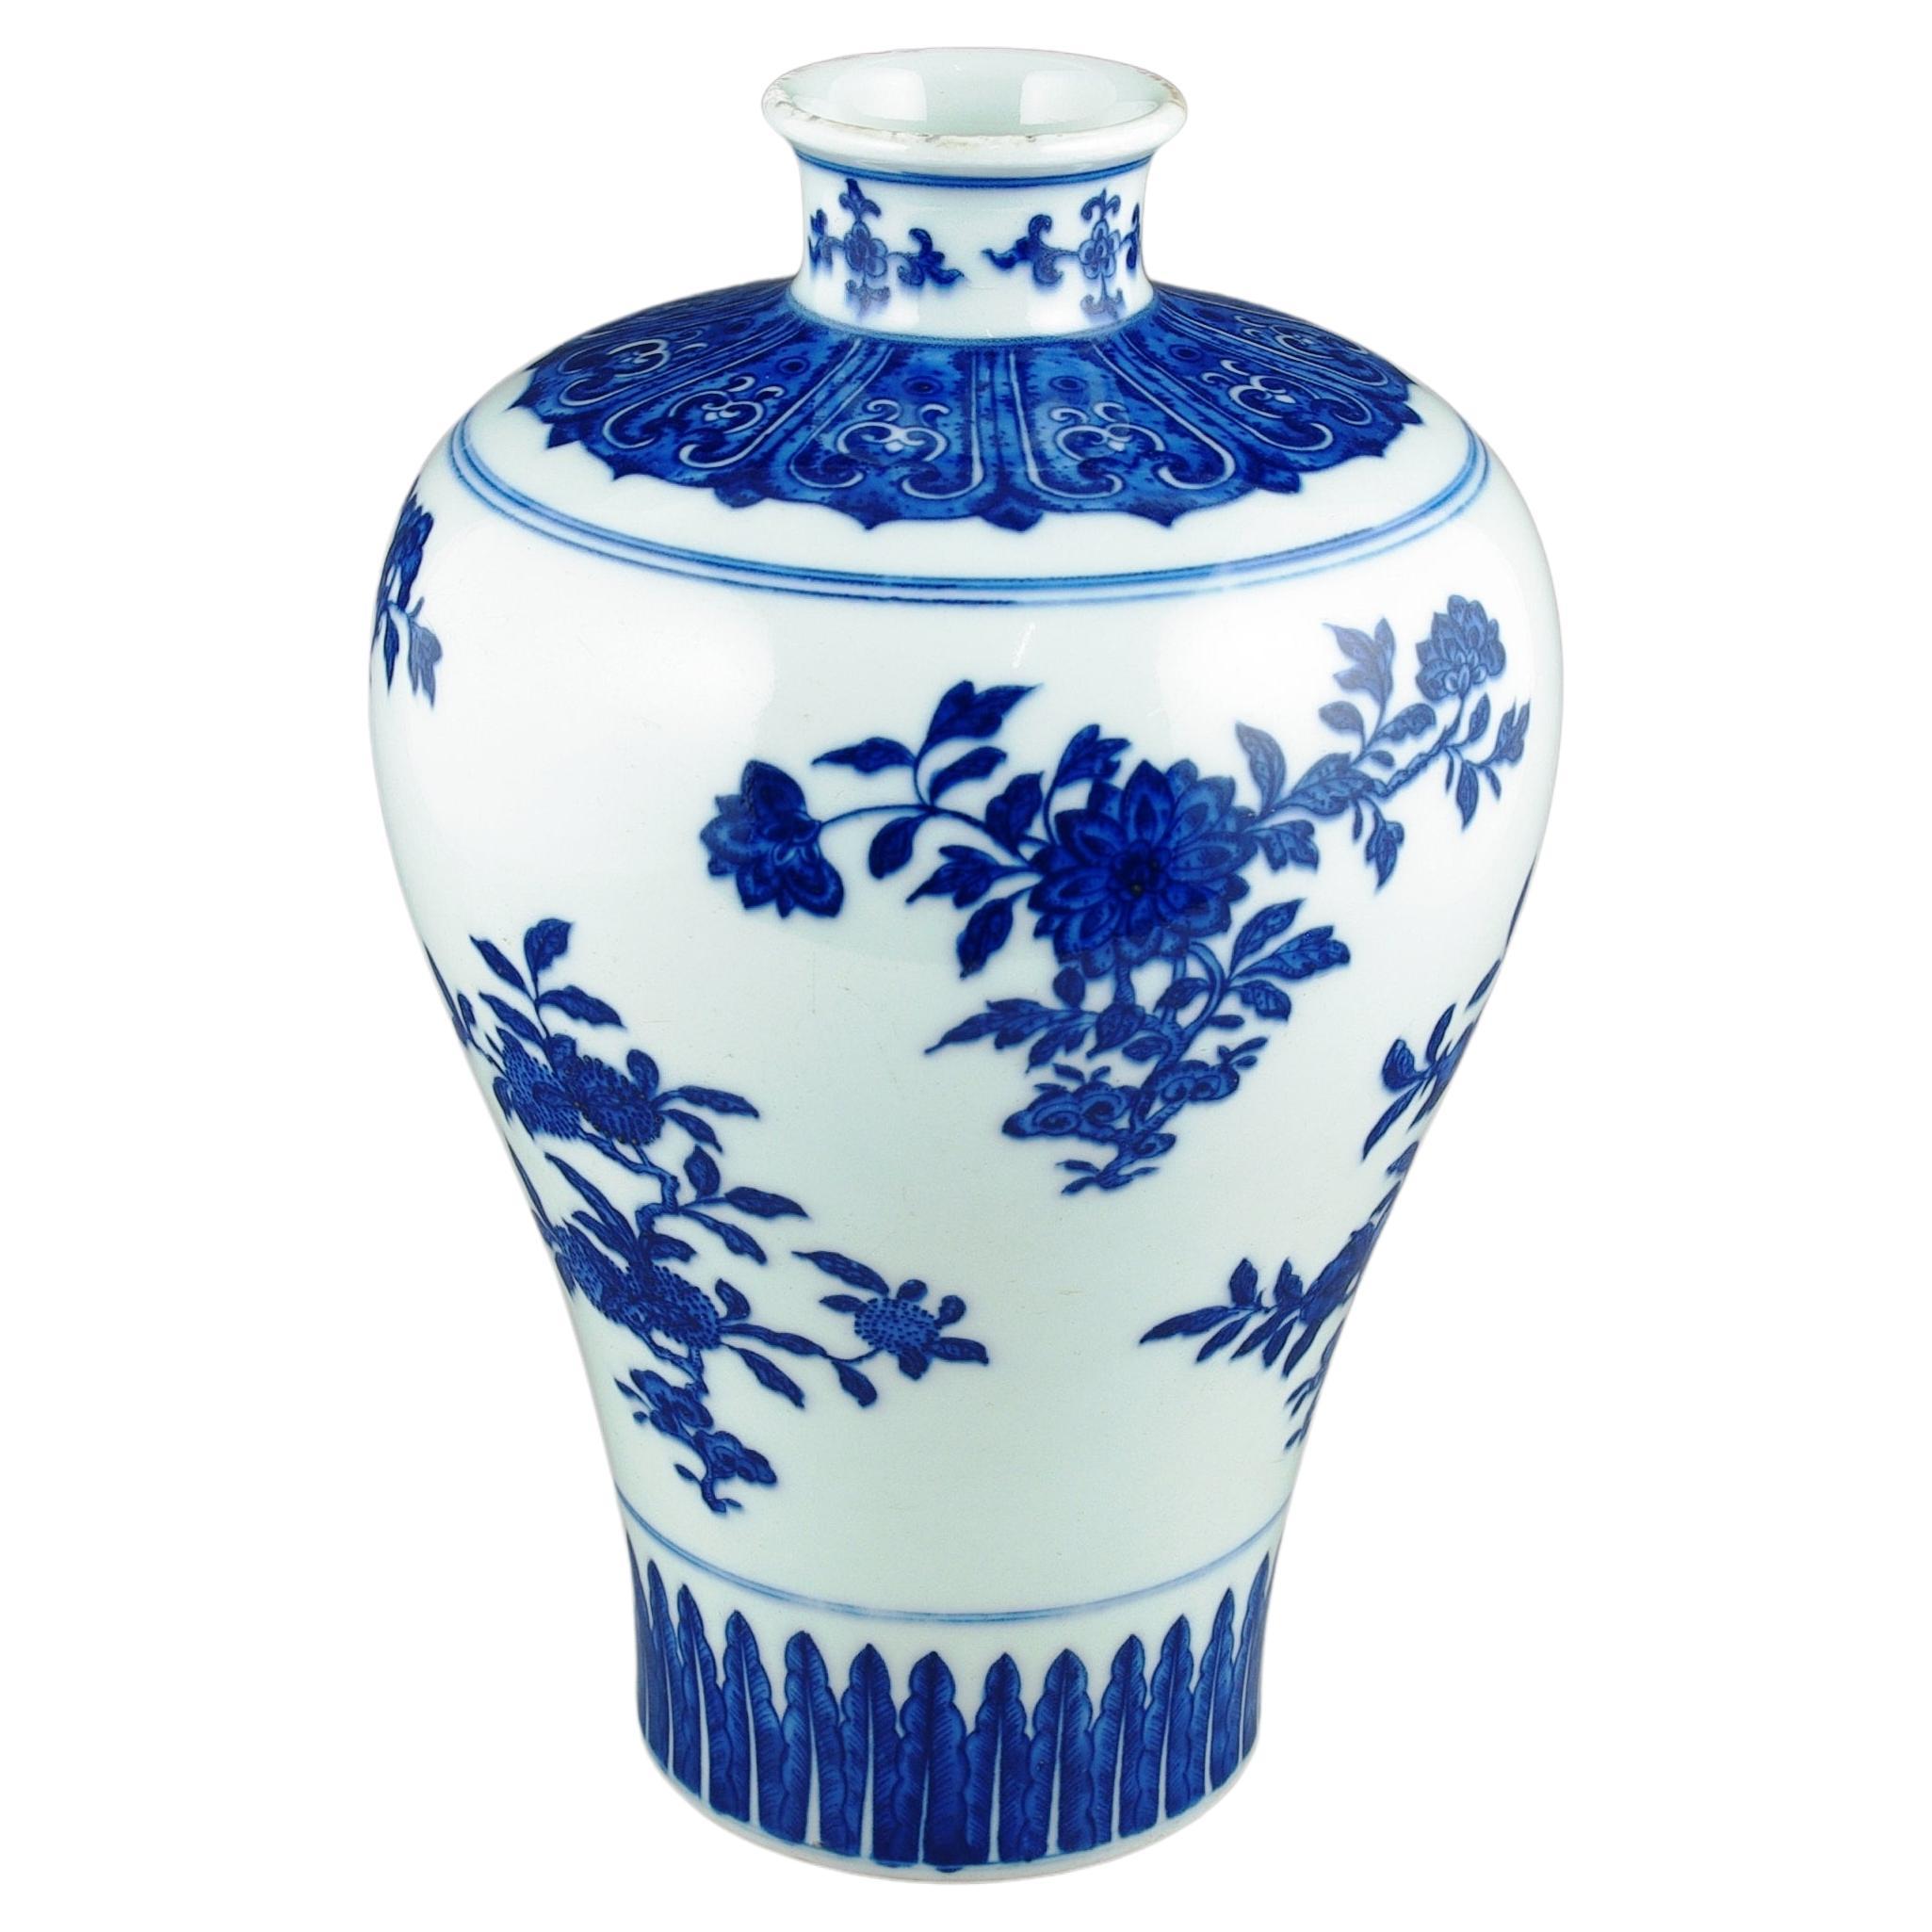 We are pleased to introduce this modern 20th-century Chinese porcelain blue and white Meiping vase, a splendid blend of expert craftsmanship and hand painting skills of the artisan and traditional Qing style aesthetics. This vase stands as a